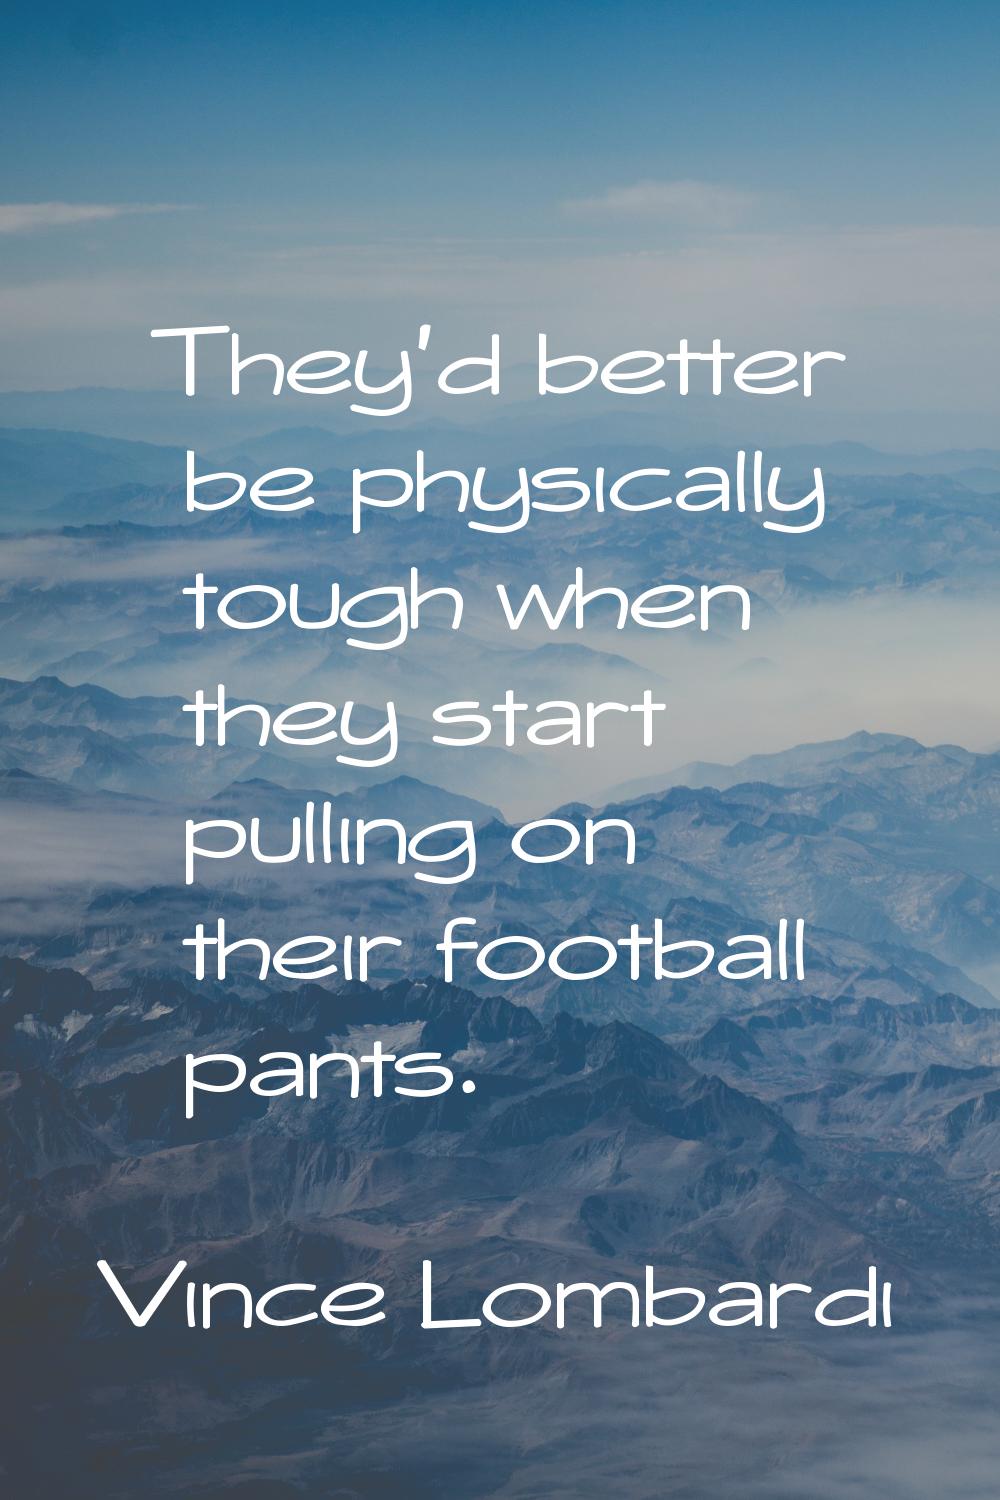 They'd better be physically tough when they start pulling on their football pants.